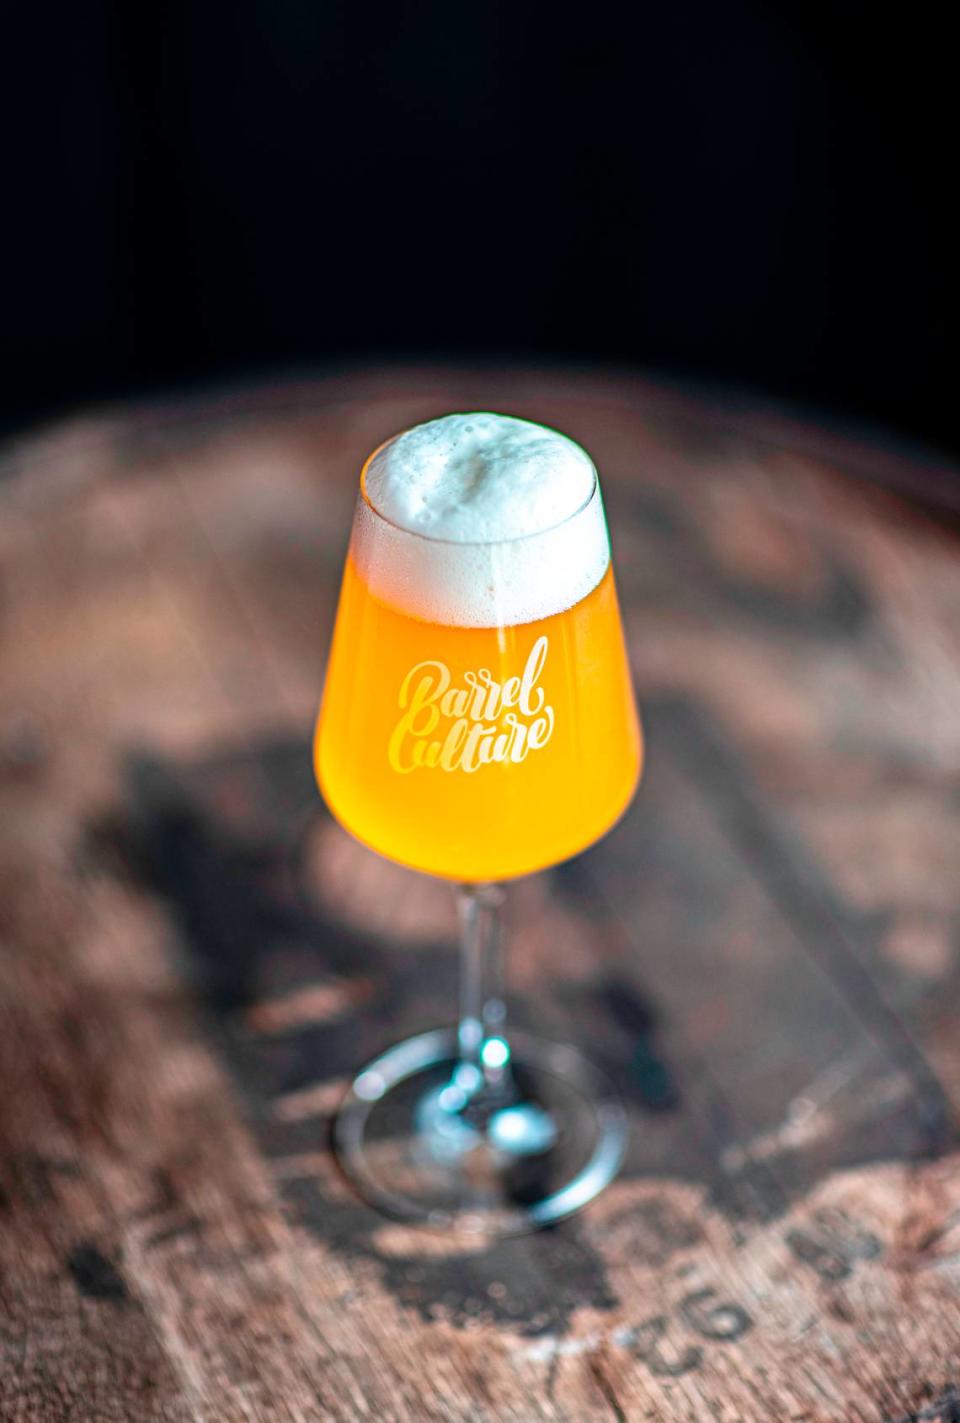 This South Durham brewery has embraced the hazy juice bomb IPA.